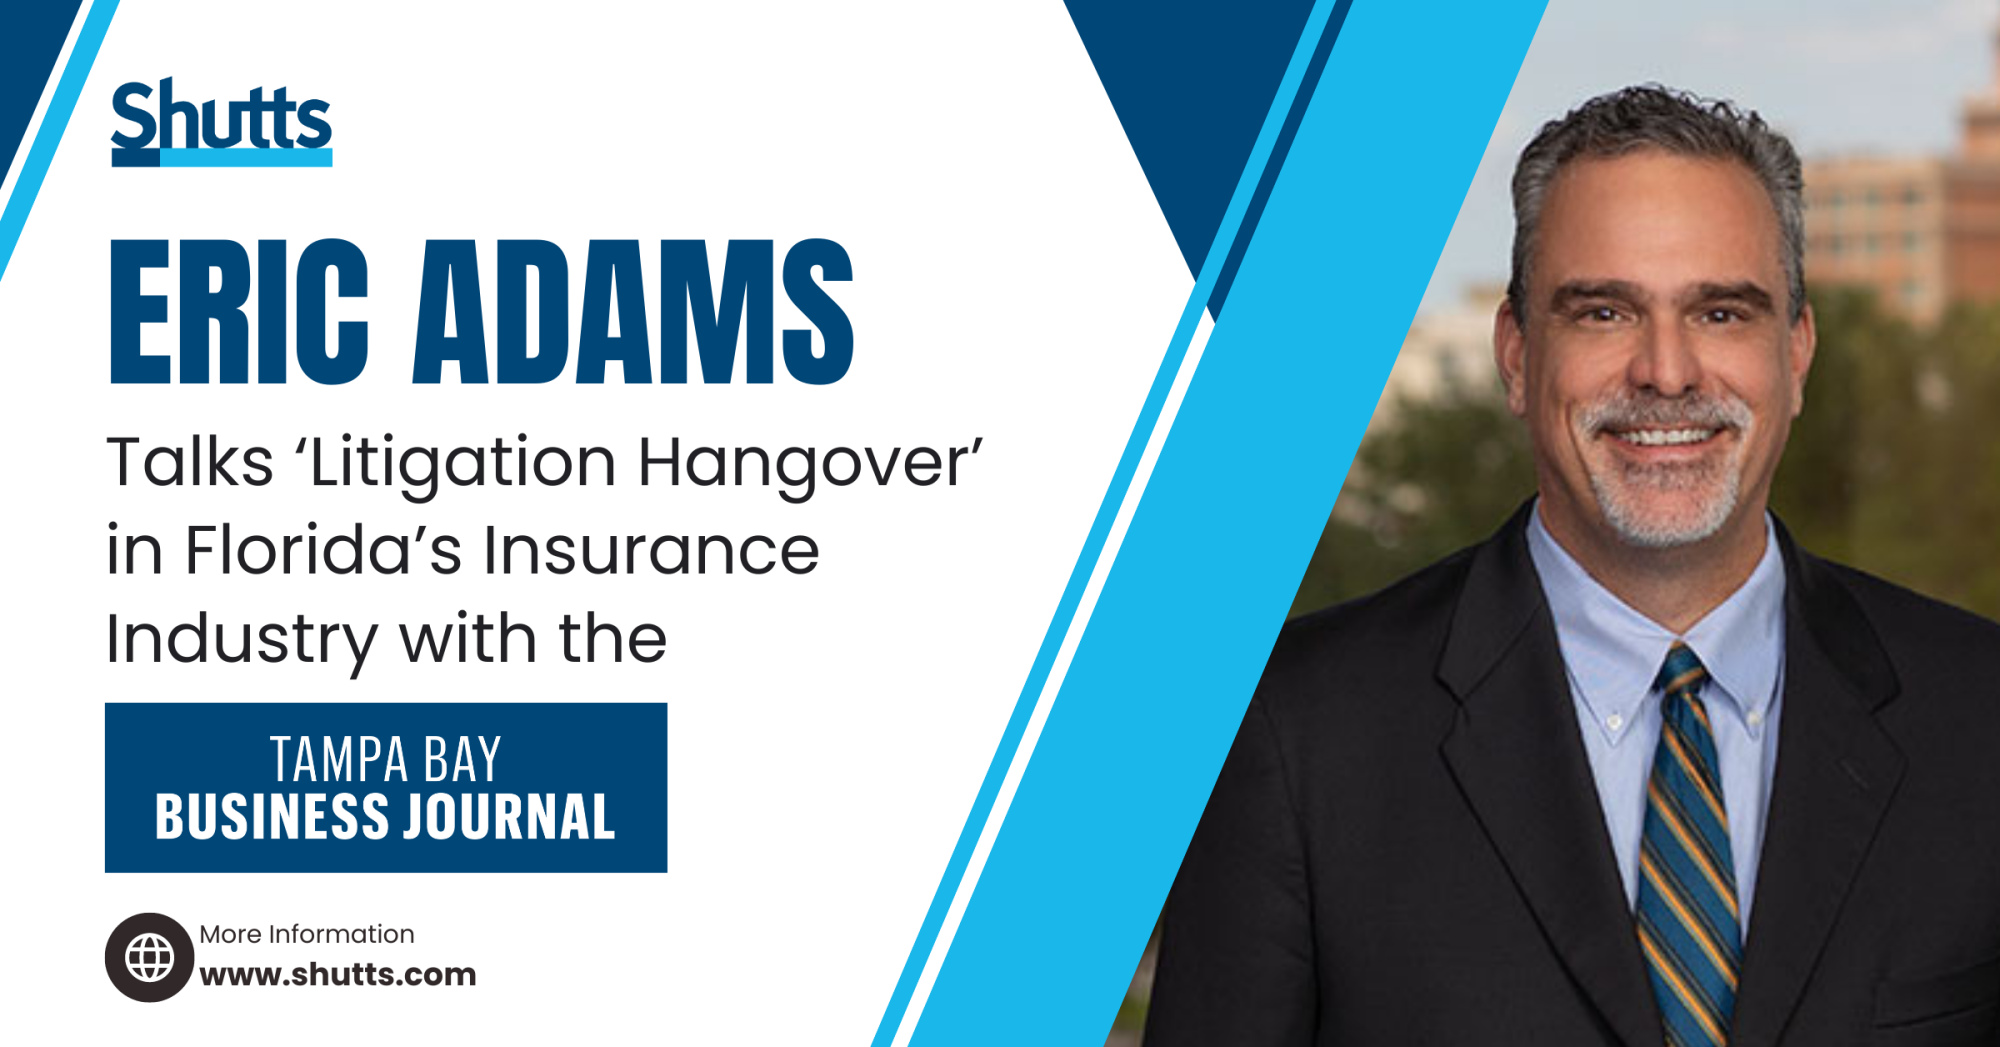 Eric Adams Talks ‘Litigation Hangover’ in Florida’s Insurance Industry with the Tampa Bay Business Journal